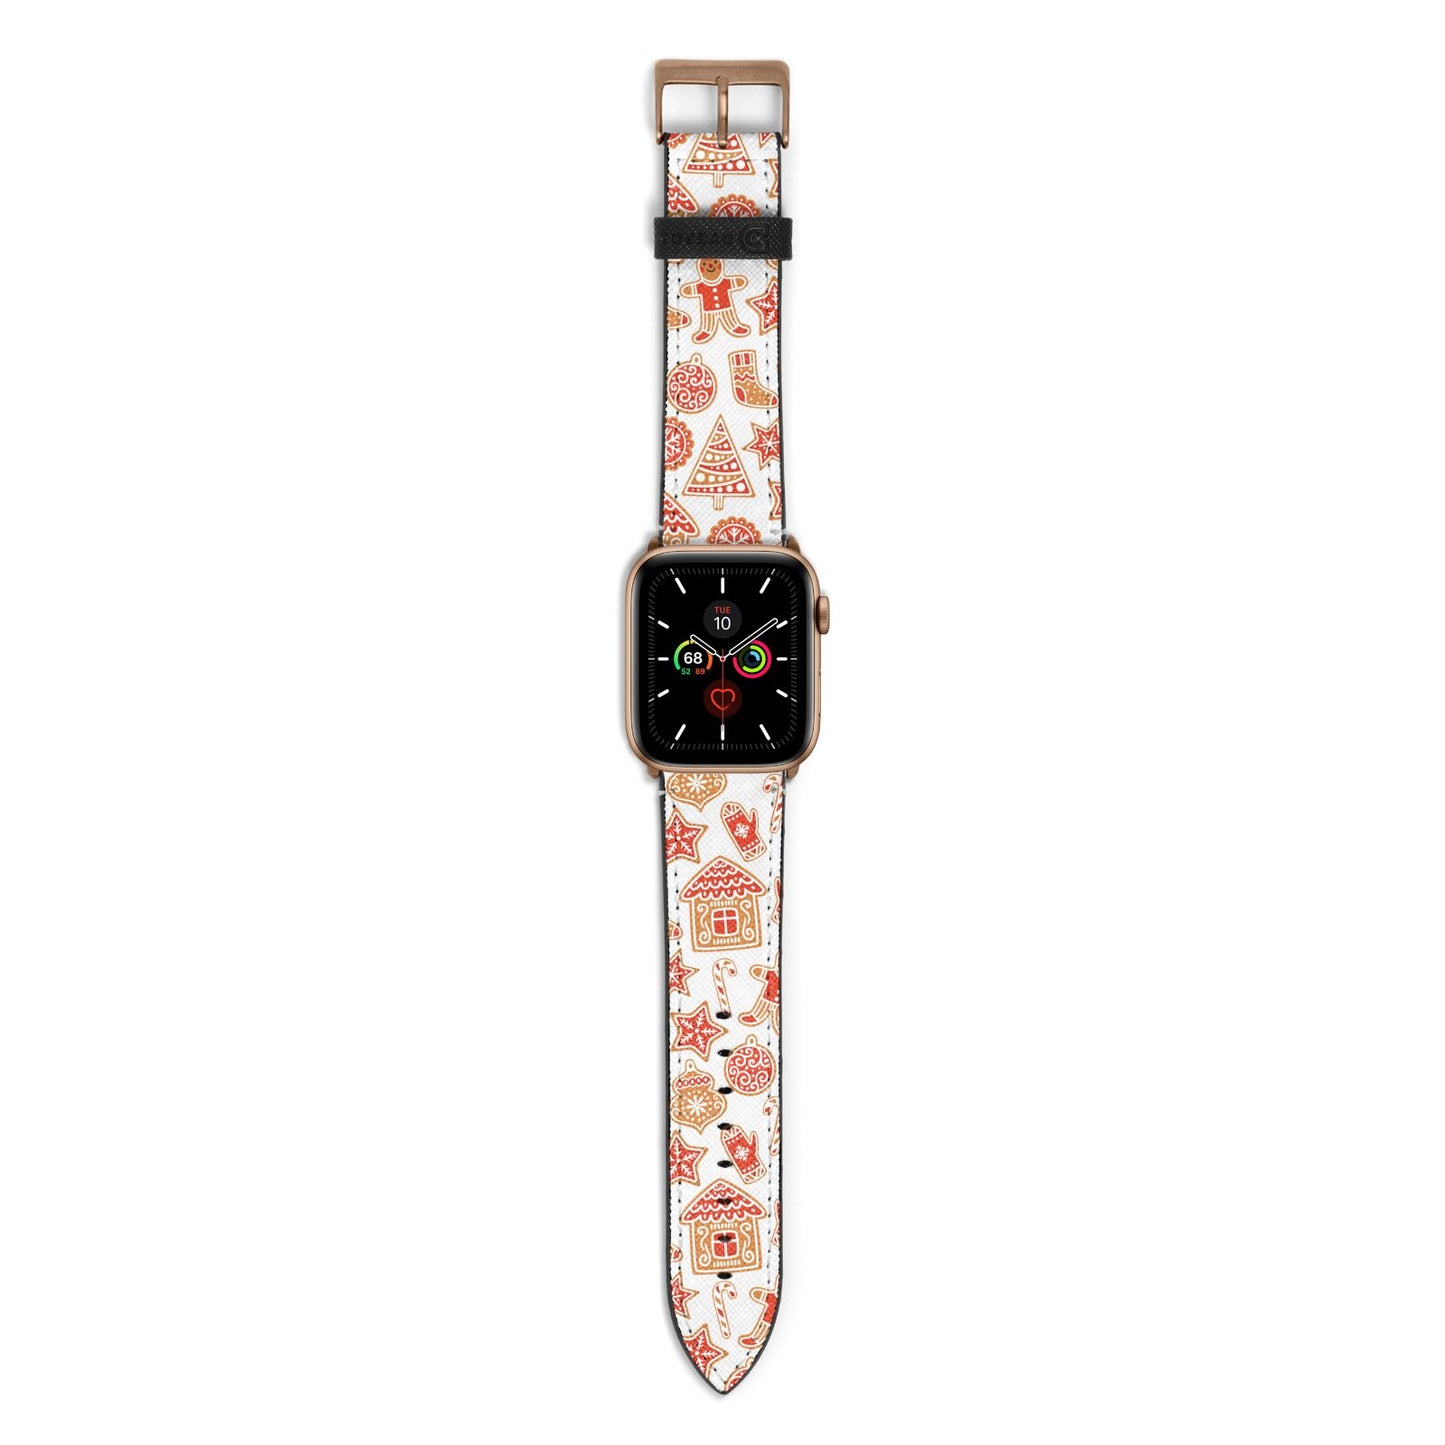 Christmas Gingerbread Apple Watch Strap with Gold Hardware